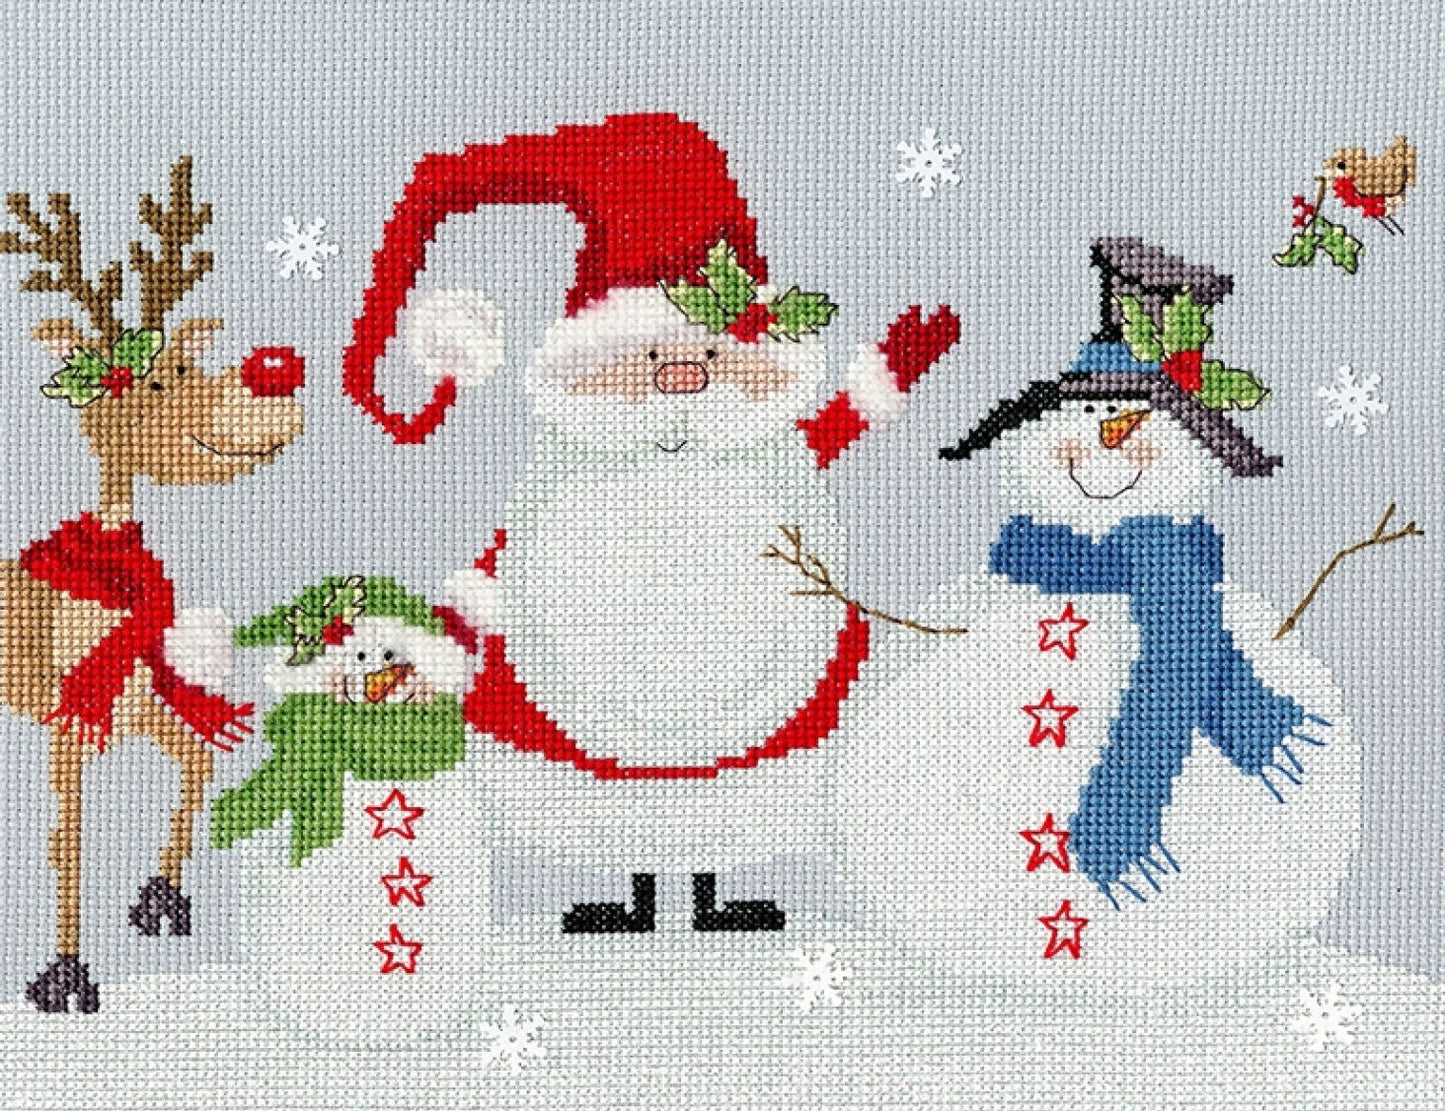 Snowy Friends Christmas Counted Cross Stitch by Bothy Threads